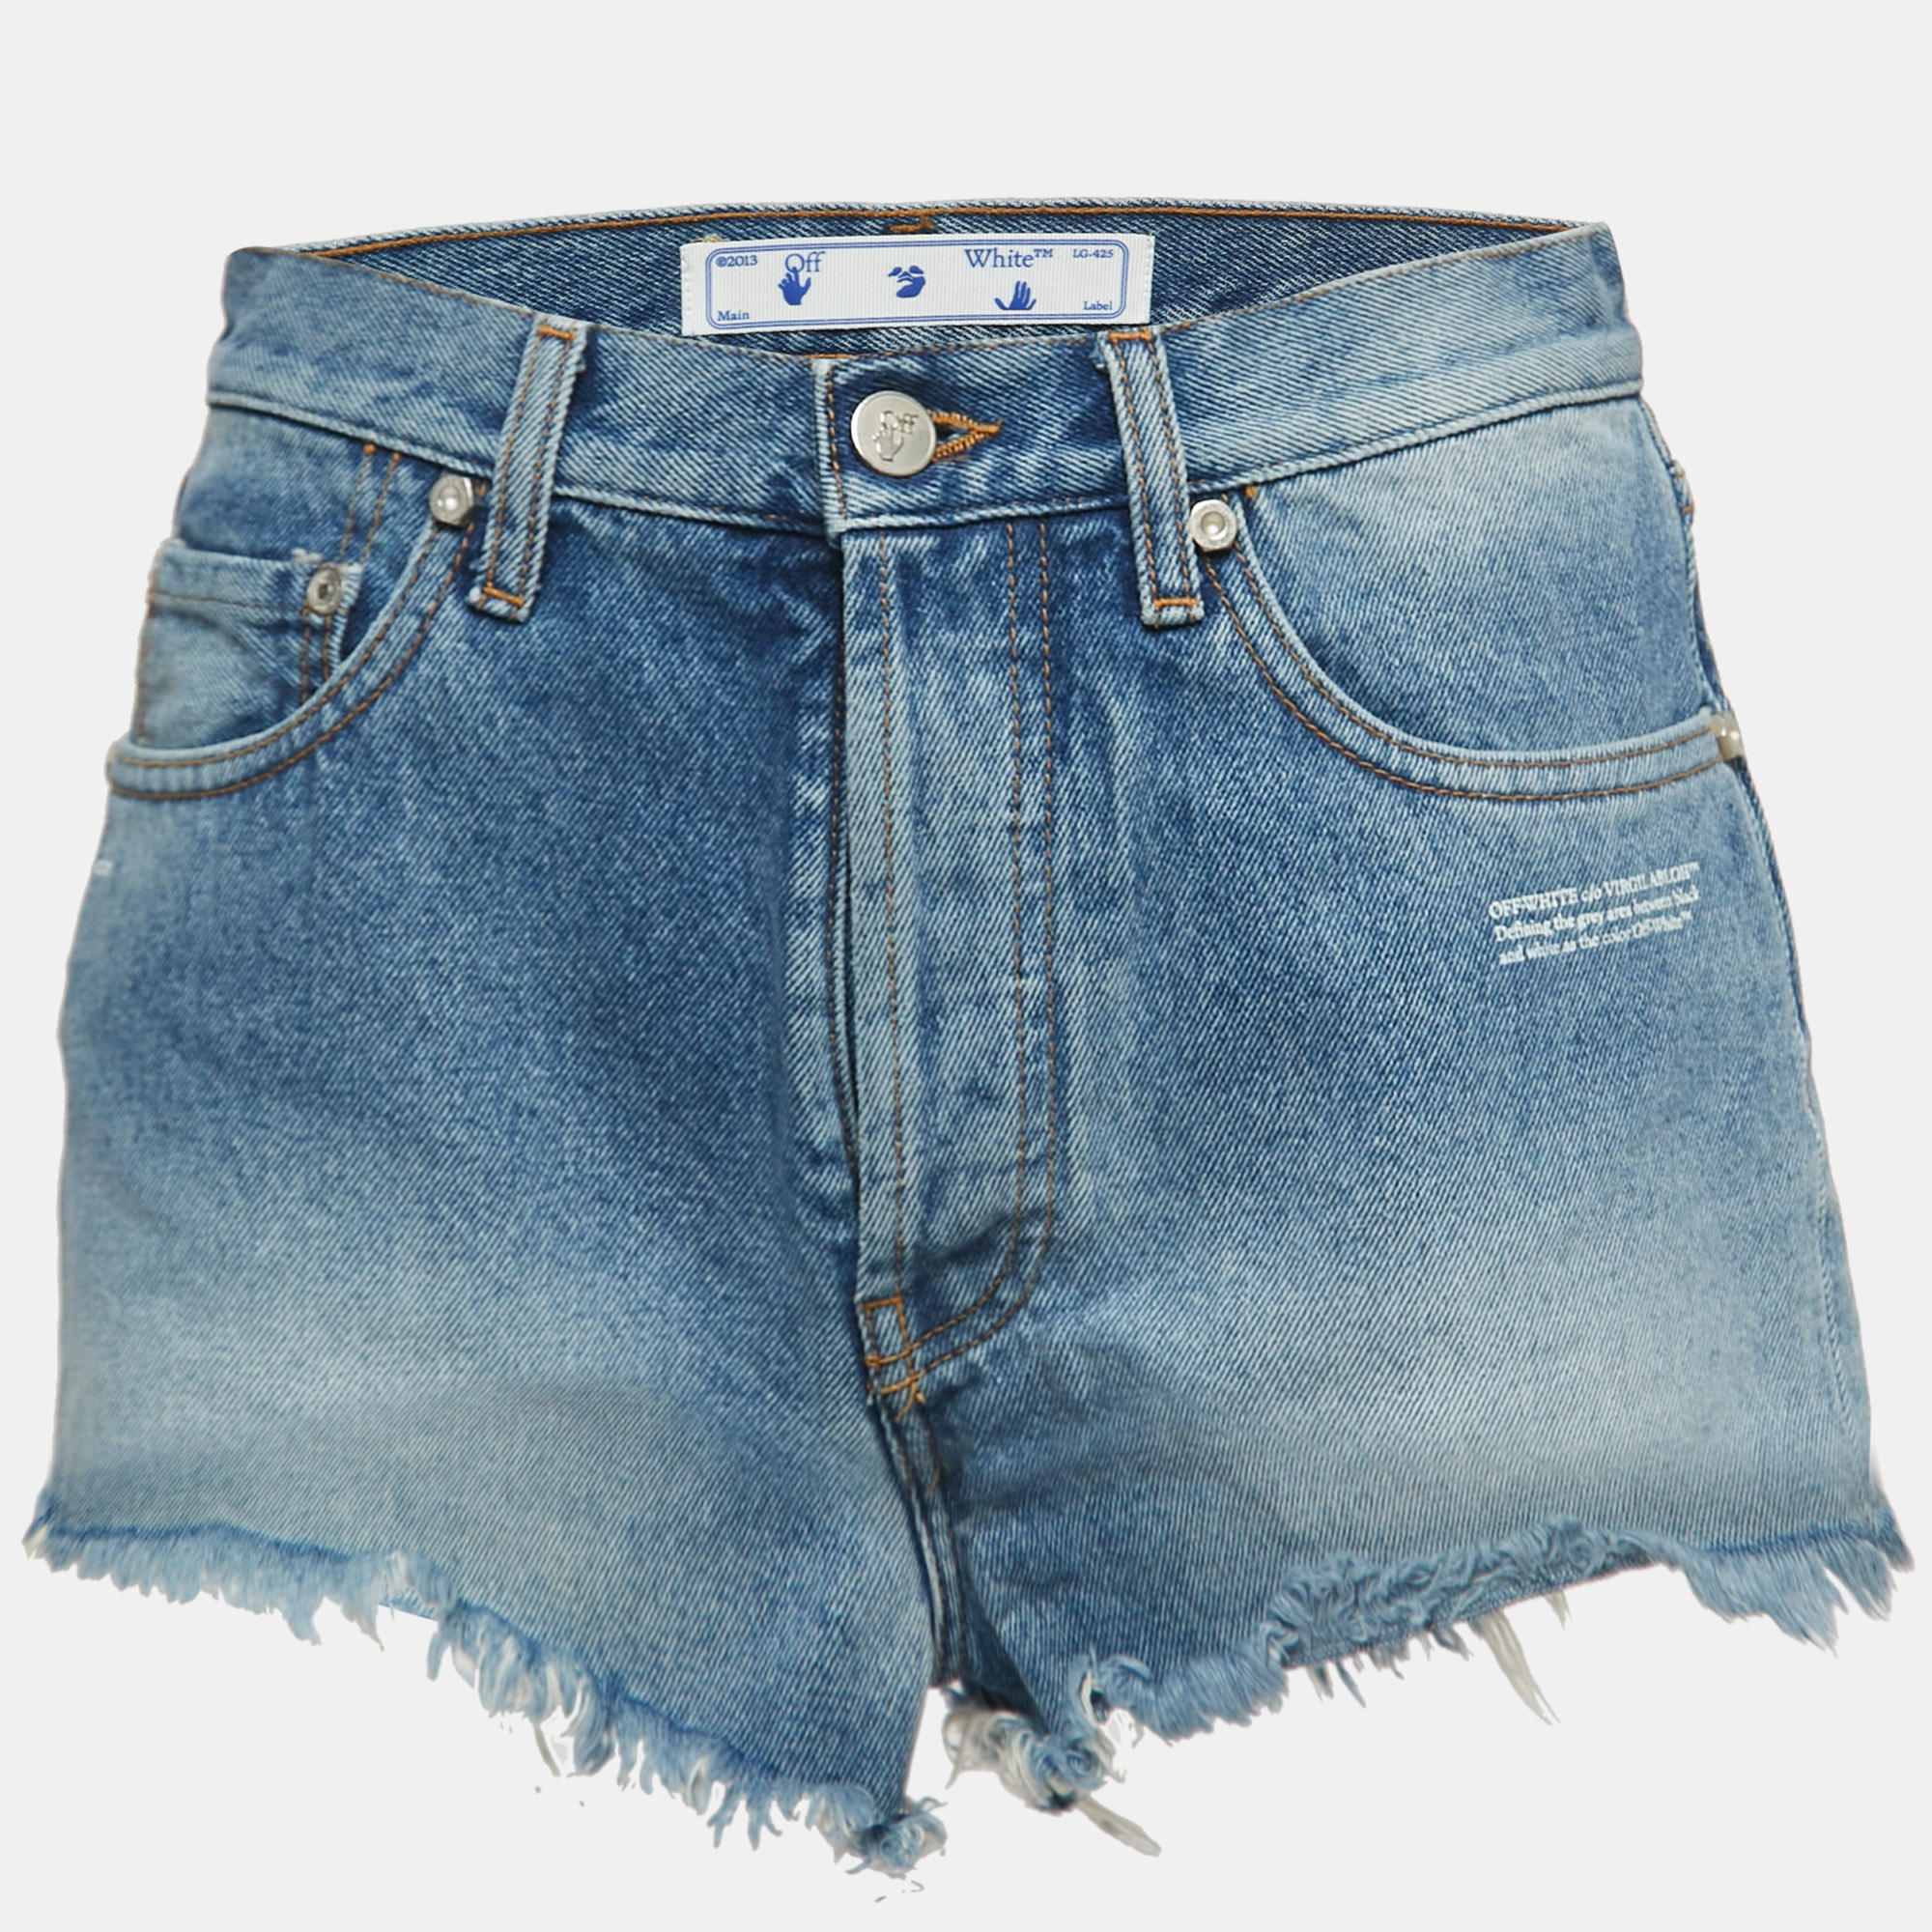 Pre-owned Off-white Blue Denim Frayed Shorts S Waist 25"